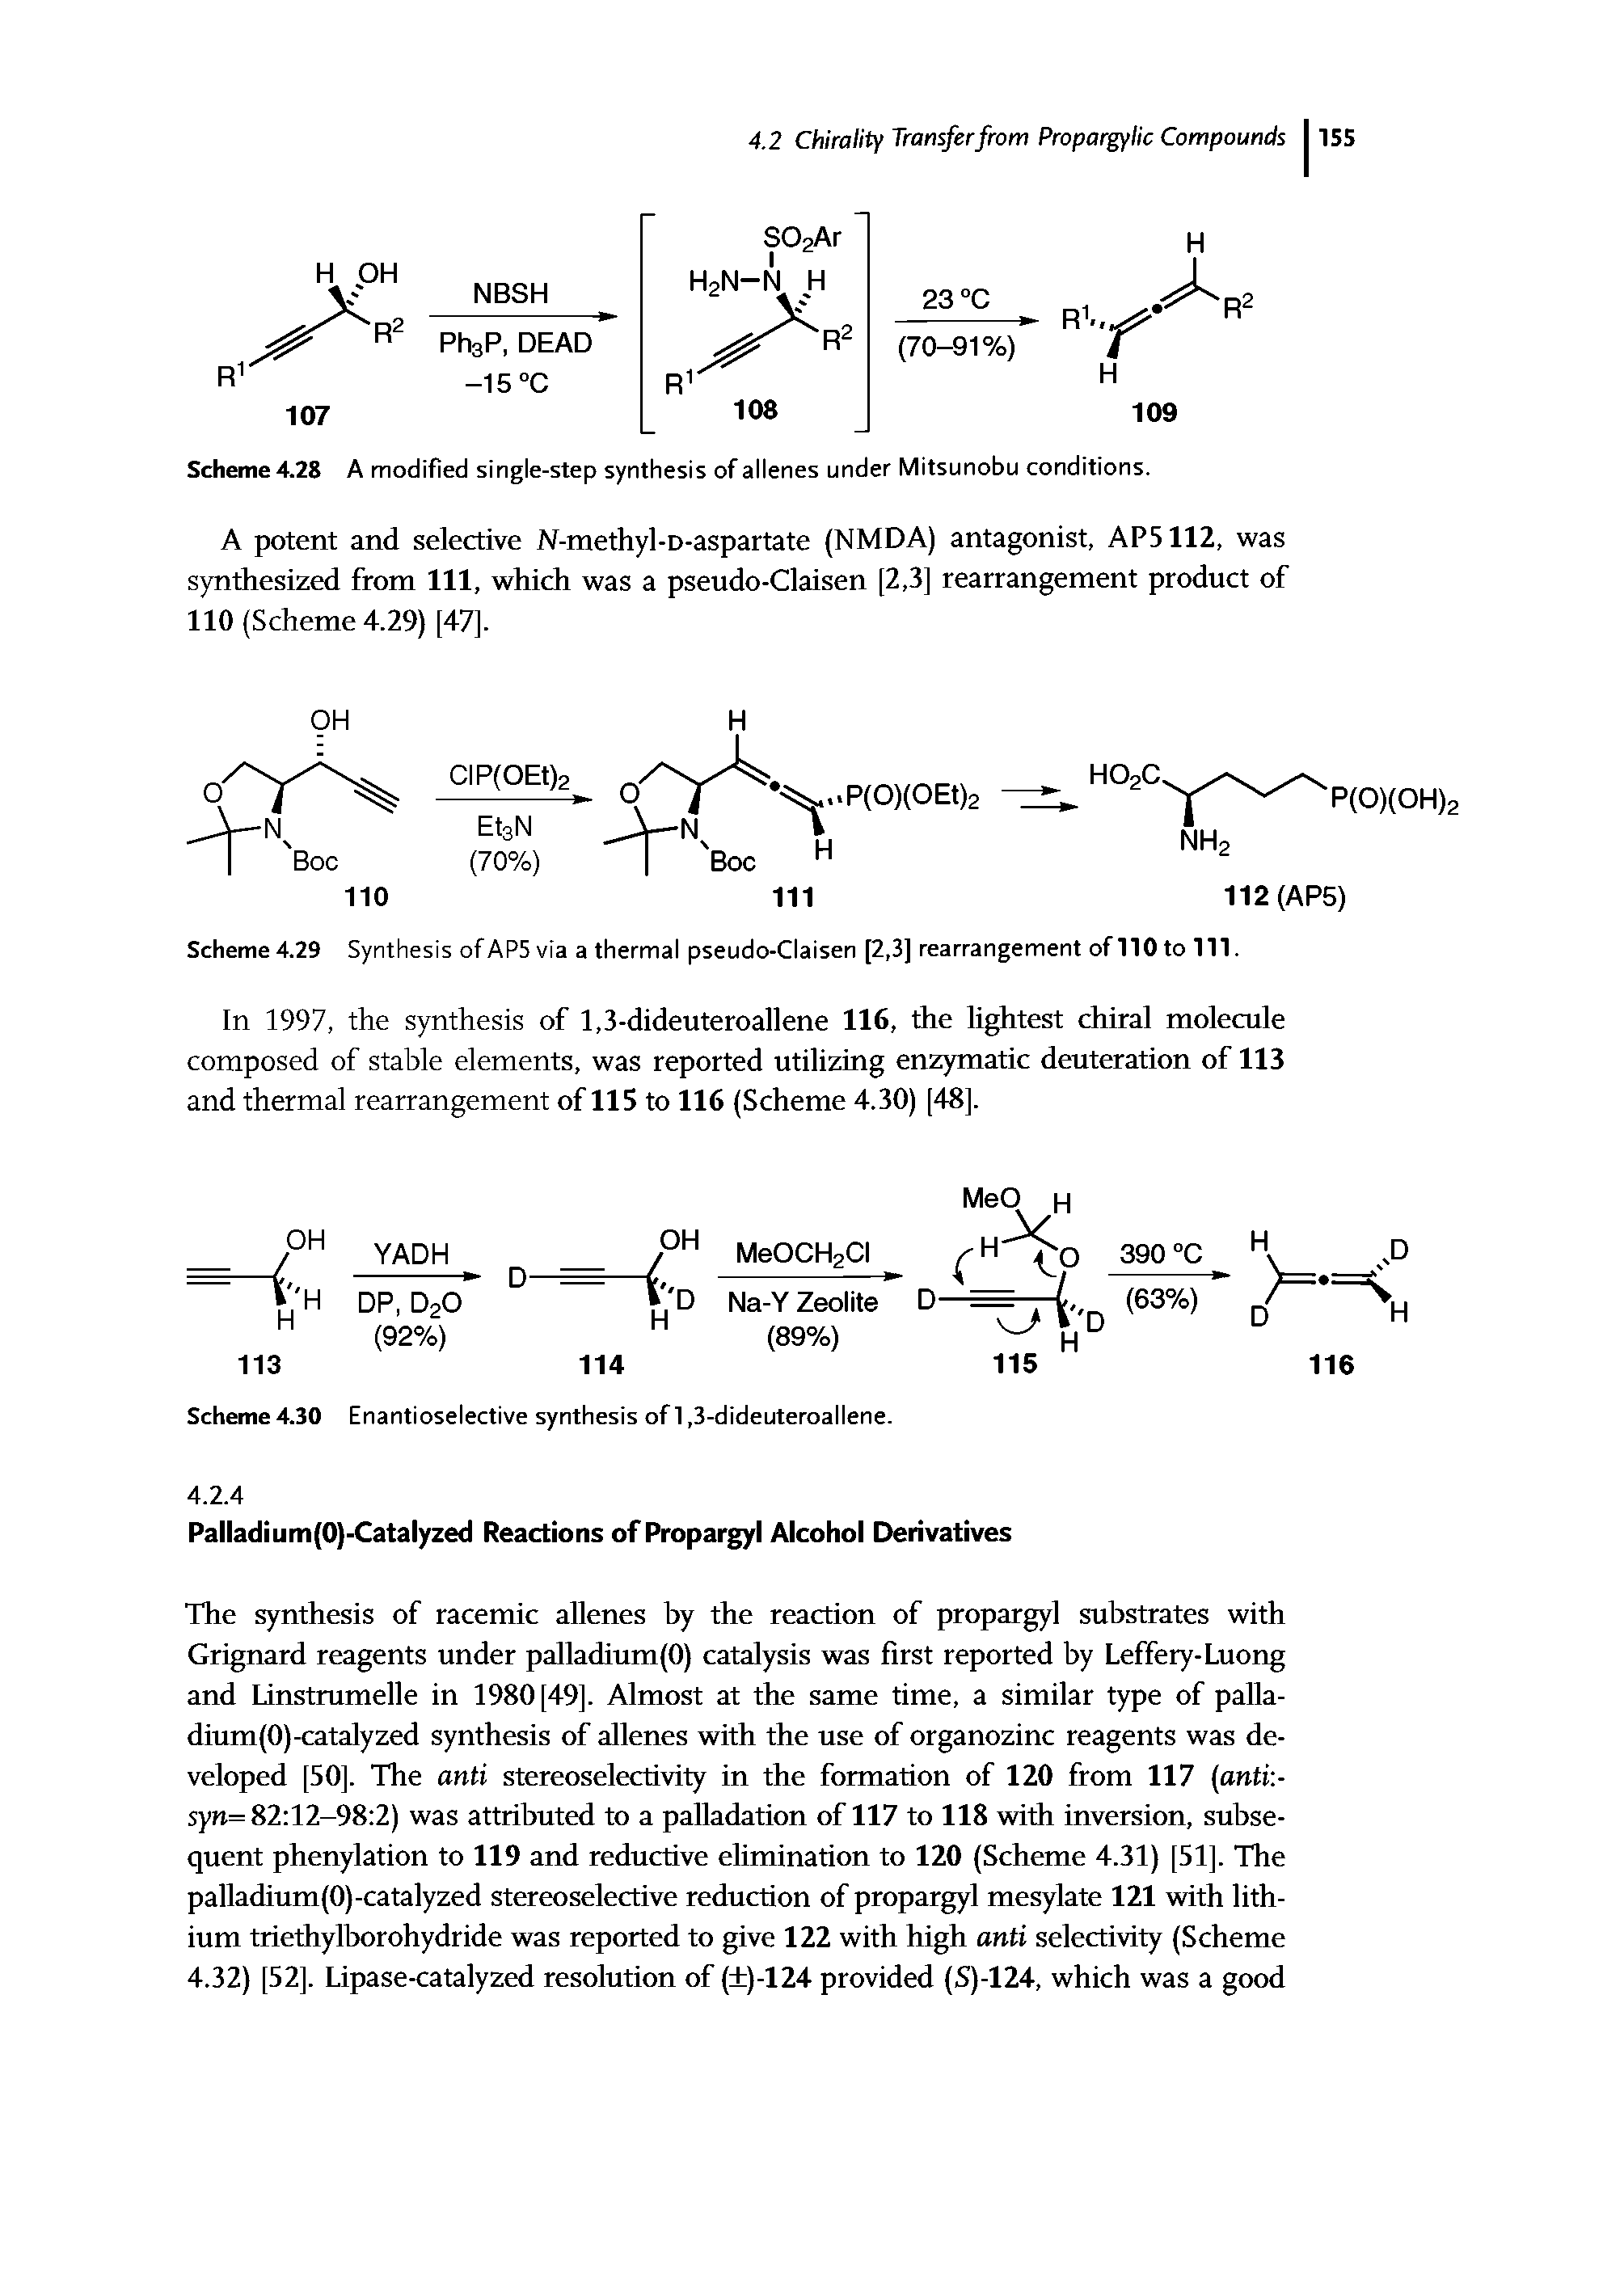 Scheme 4.28 A modified single-step synthesis of allenes under Mitsunobu conditions.